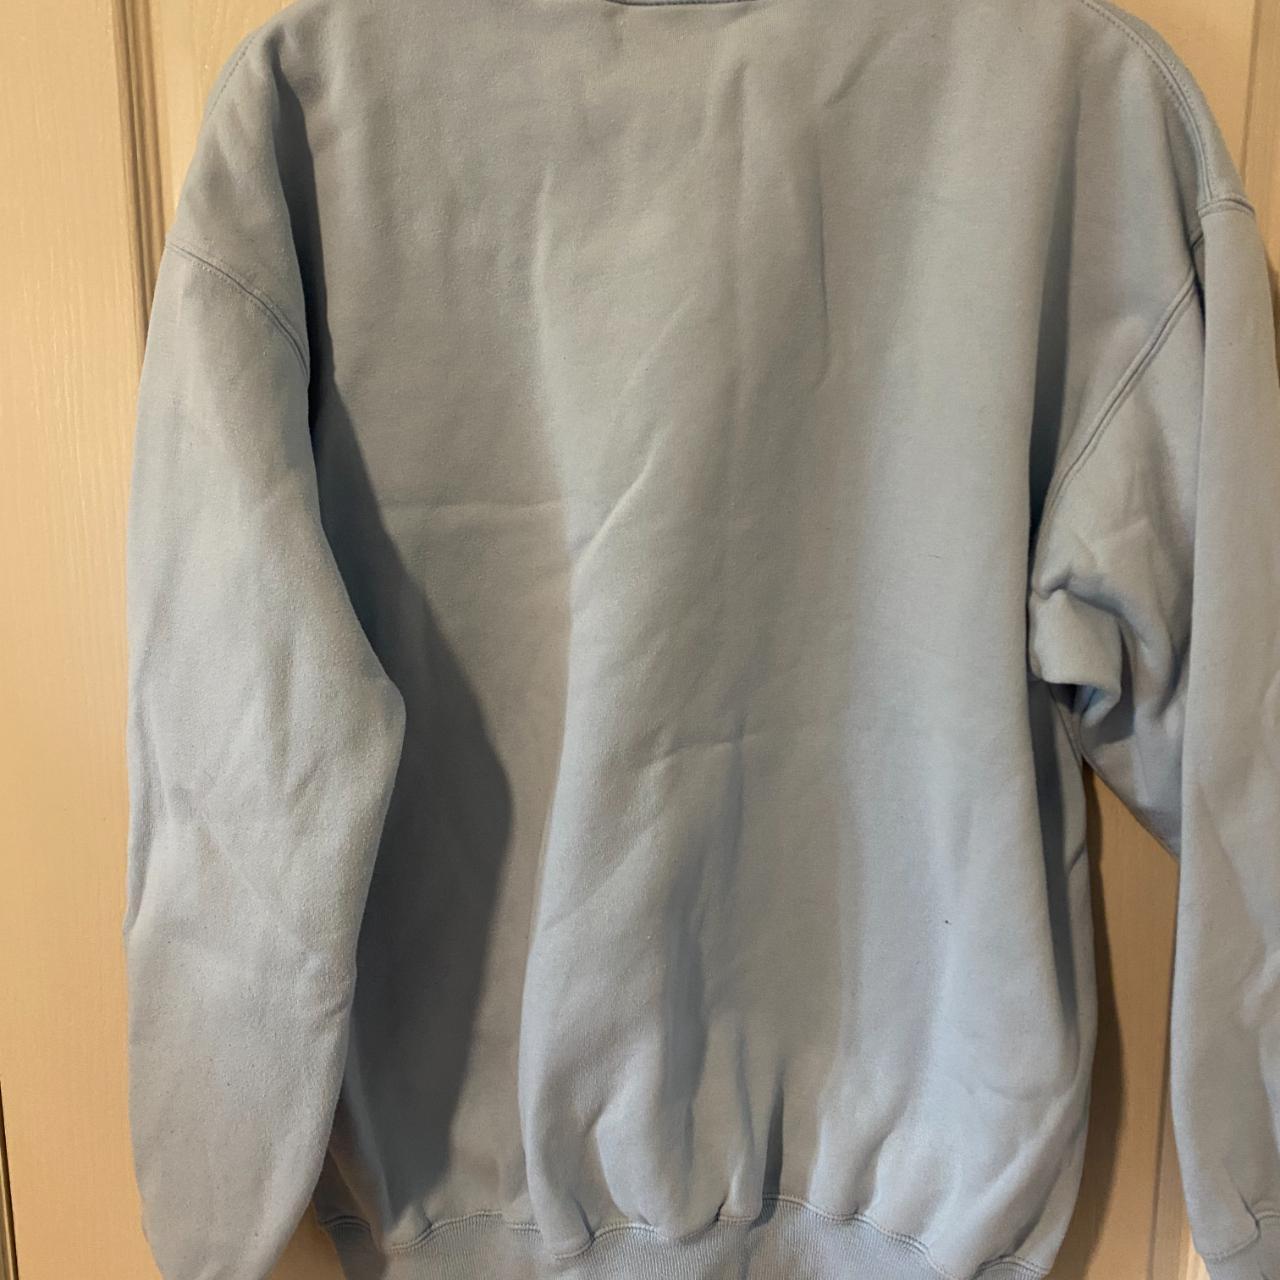 Nike baby blue embroidered custom Butterfly Crewneck - Depop